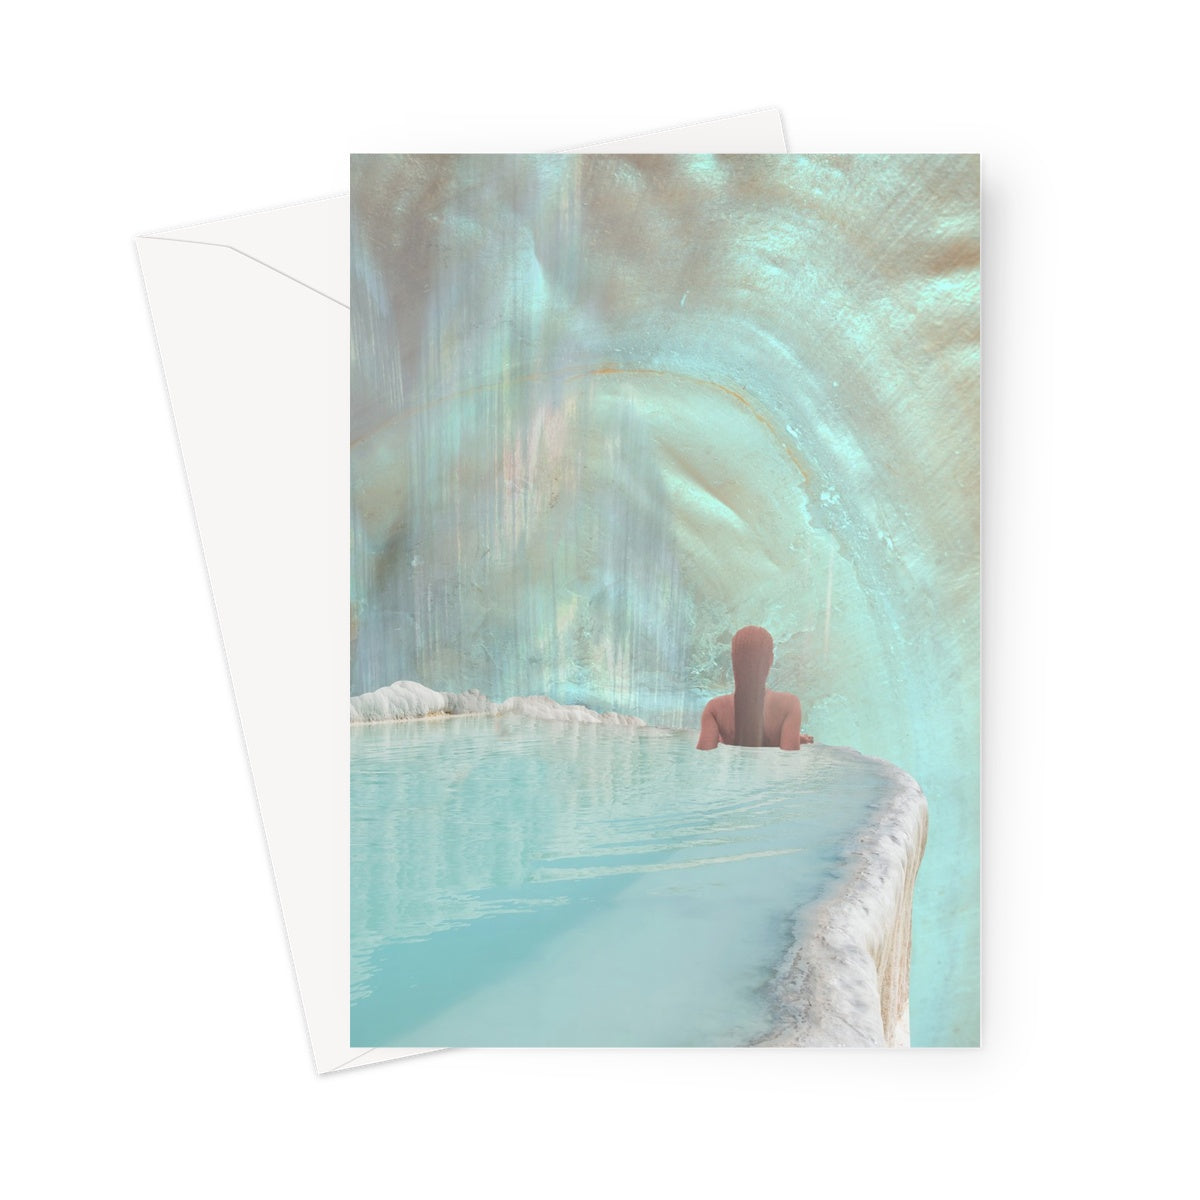 Restful Pause Greeting Card - Starseed Designs Inc.